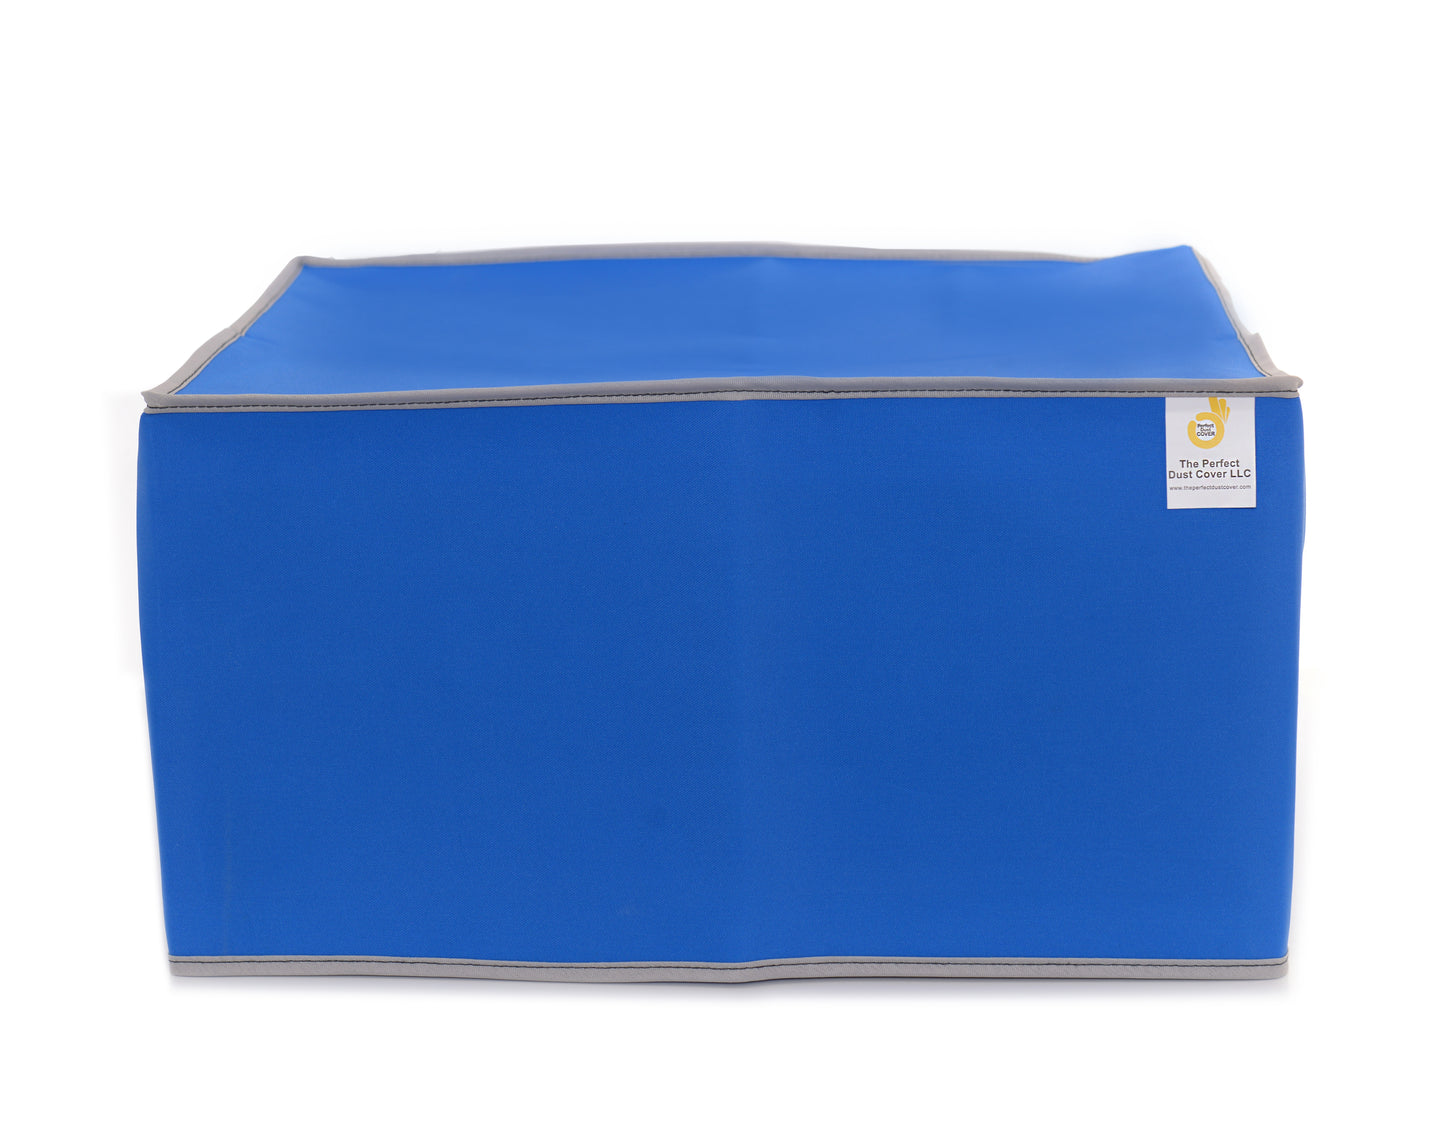 The Perfect Dust Cover, Royal Blue Nylon Cover Compatible with HP OfficeJet Pro 9720e Wireless Wide Format Inkjet Printer, Anti Static, Double Stitched and Waterproof Dust Cover Dimensions 22.9''W x 18.4''D x 15.2''H by Perfect Dust Cover LLC